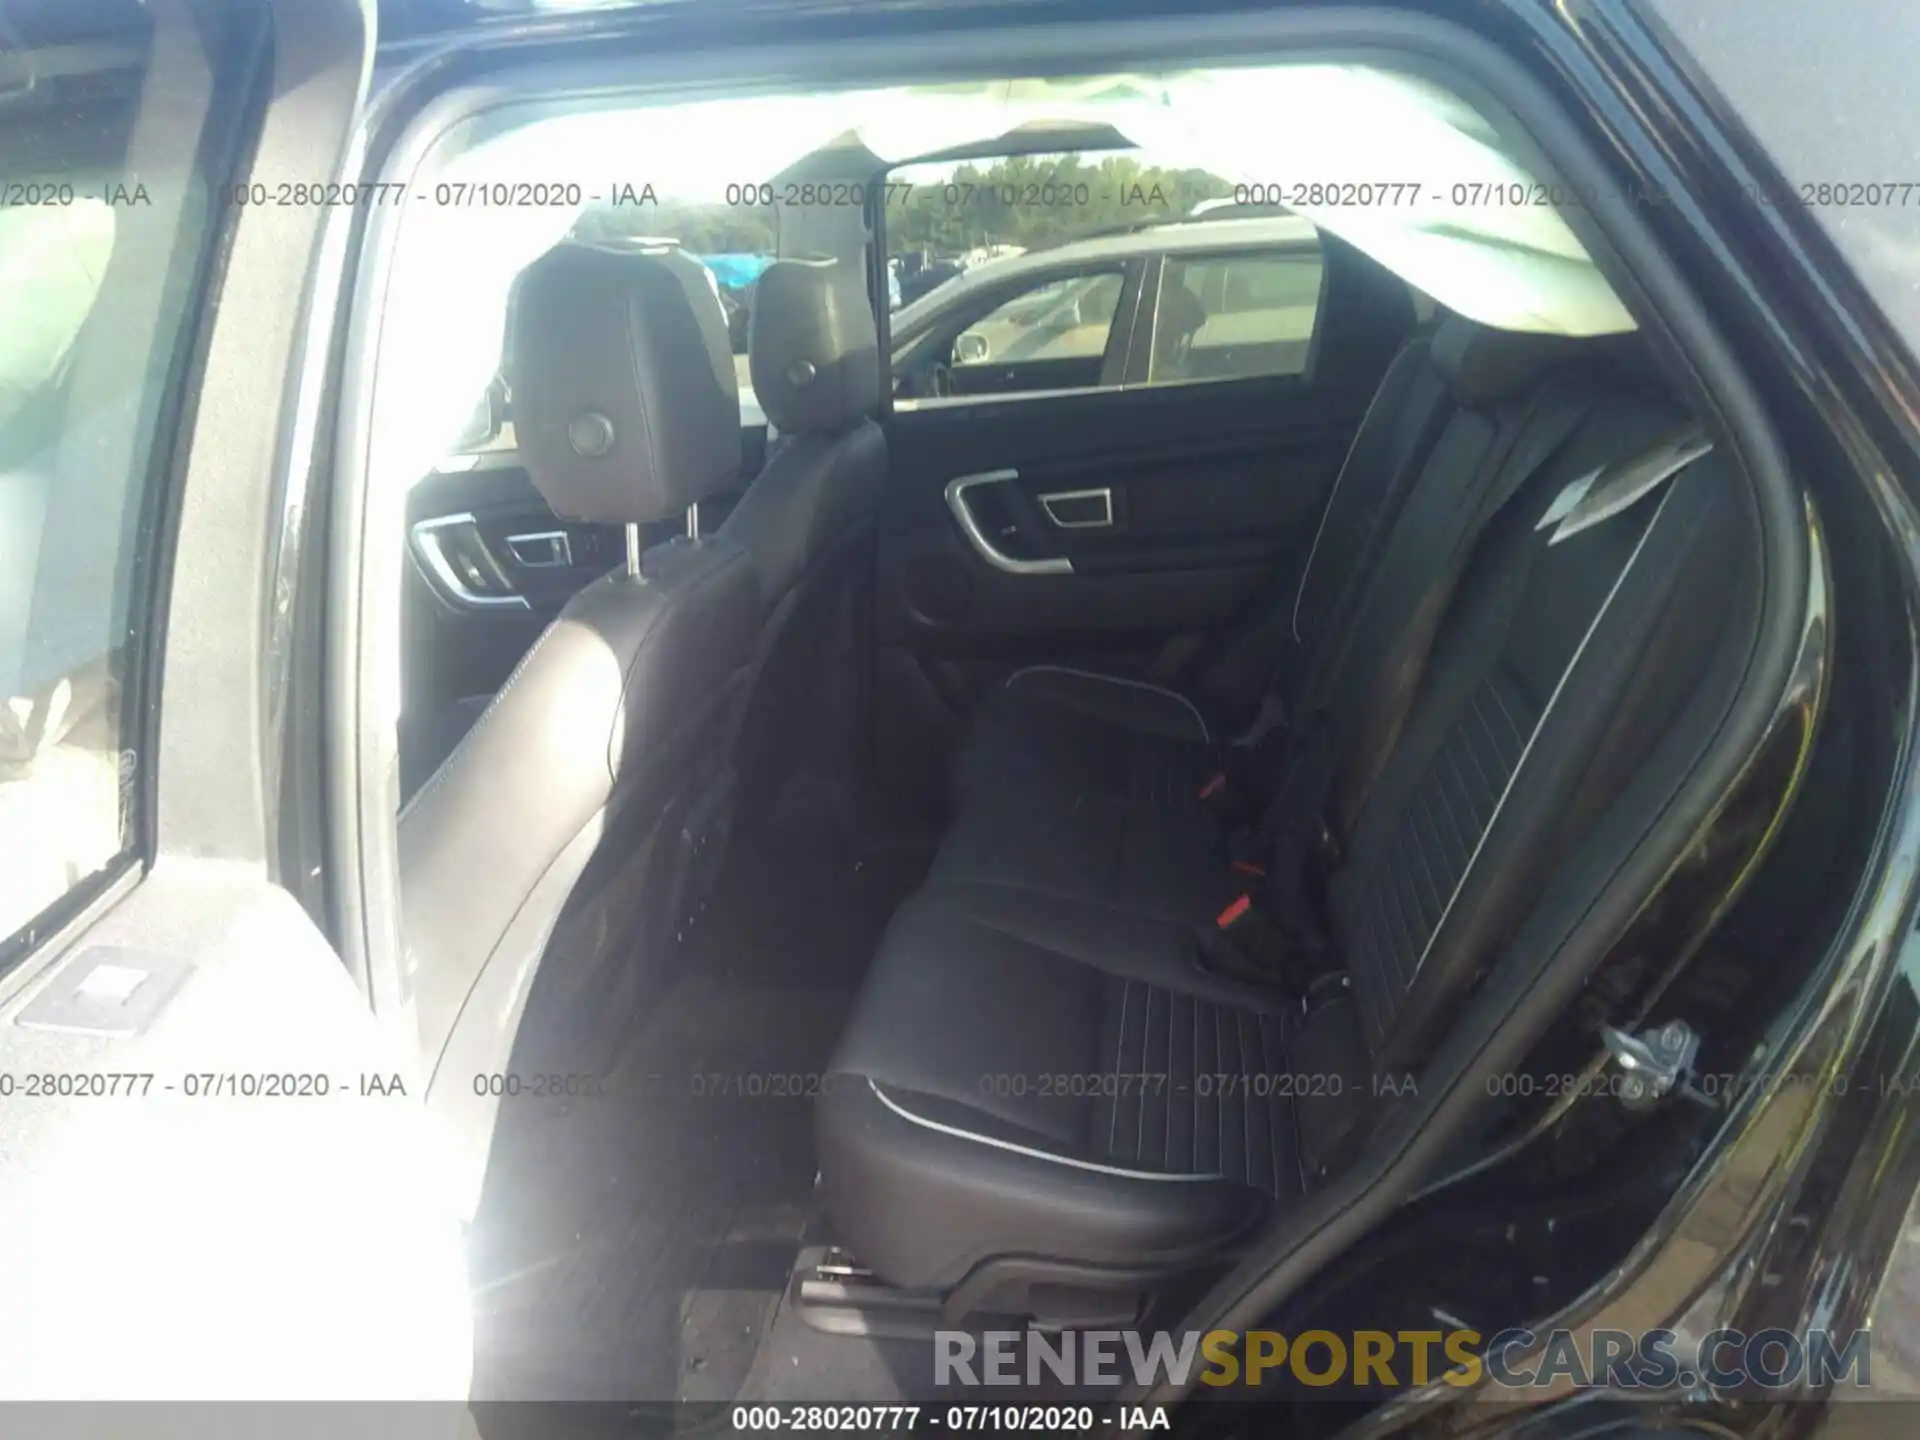 8 Photograph of a damaged car SALCR2GX7KH789617 LAND ROVER DISCOVERY SPORT 2019